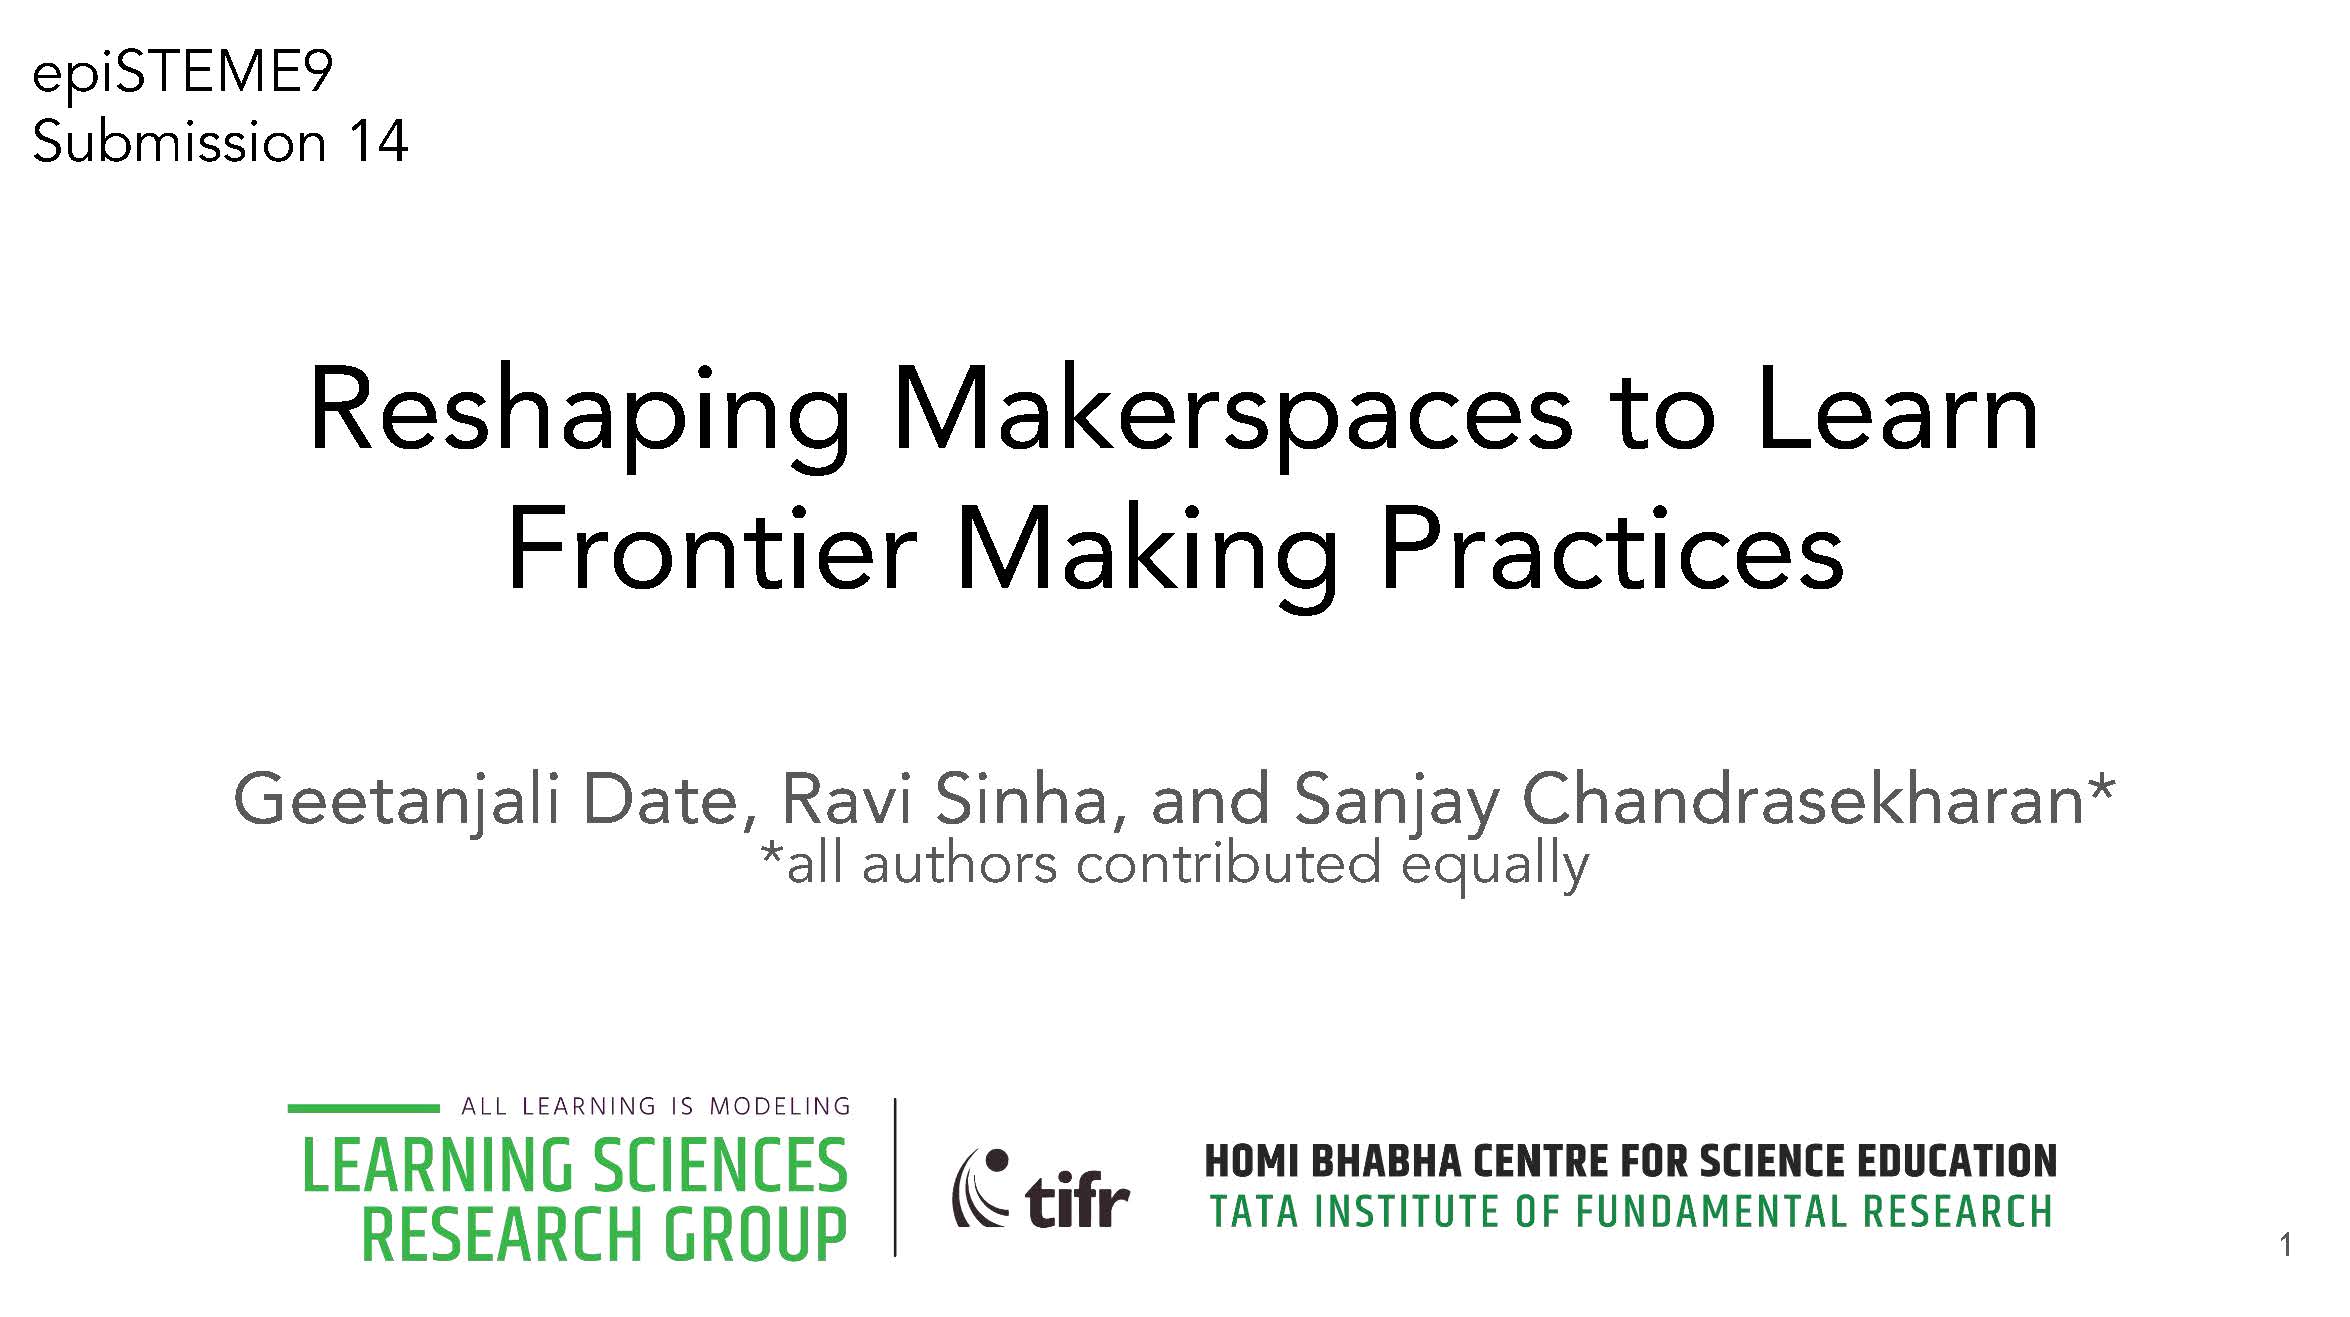 Reshaping Makerspaces to Learn Frontier Making Practices